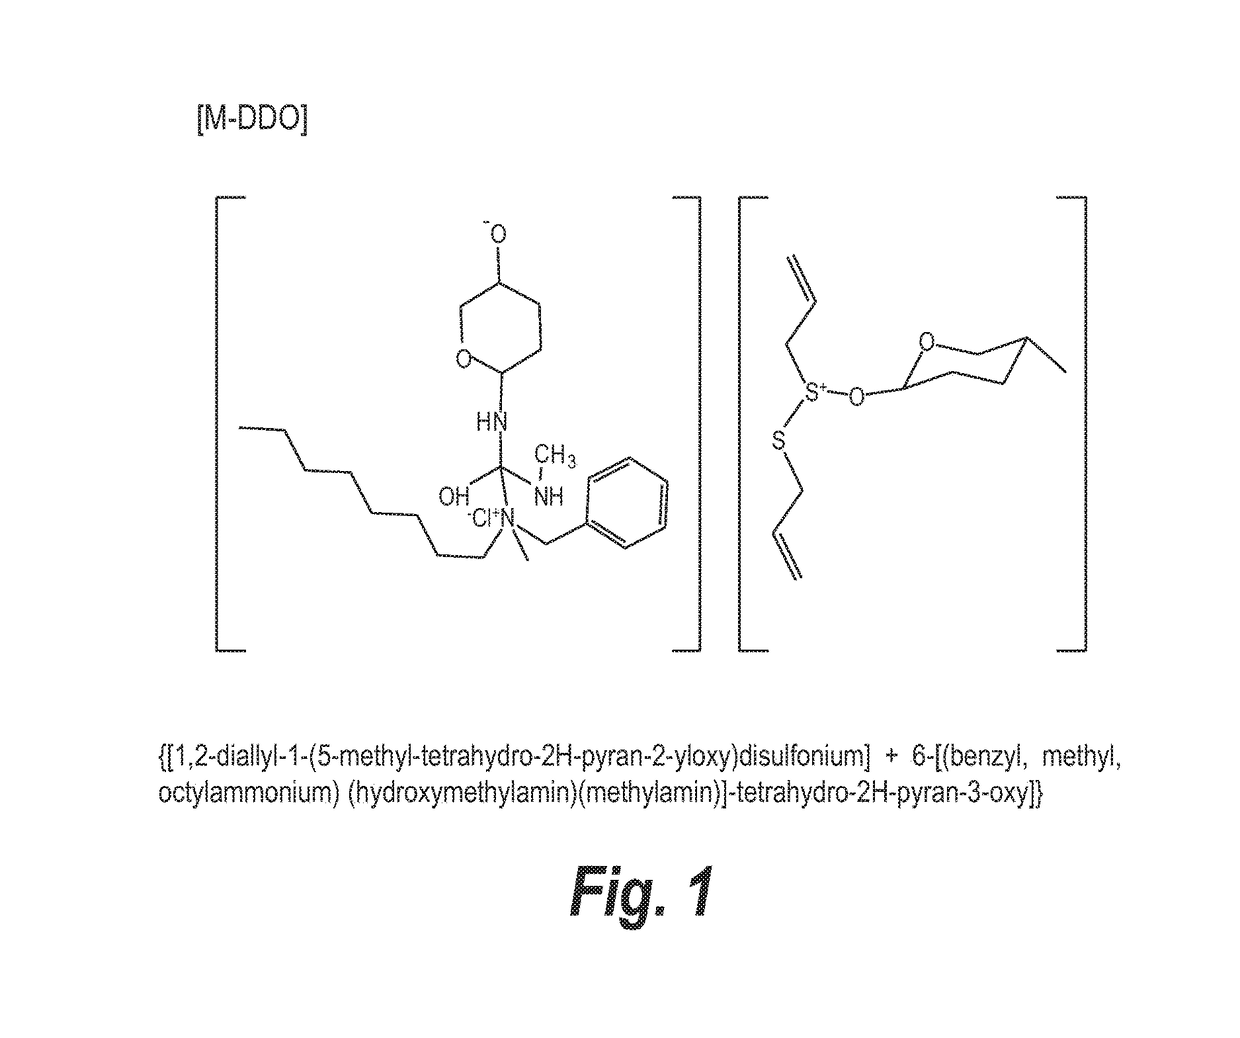 Semi-solid topical composition containing pirfenidone and modified diallyl disulfide oxide (M-DDO) for eliminating or preventing acne